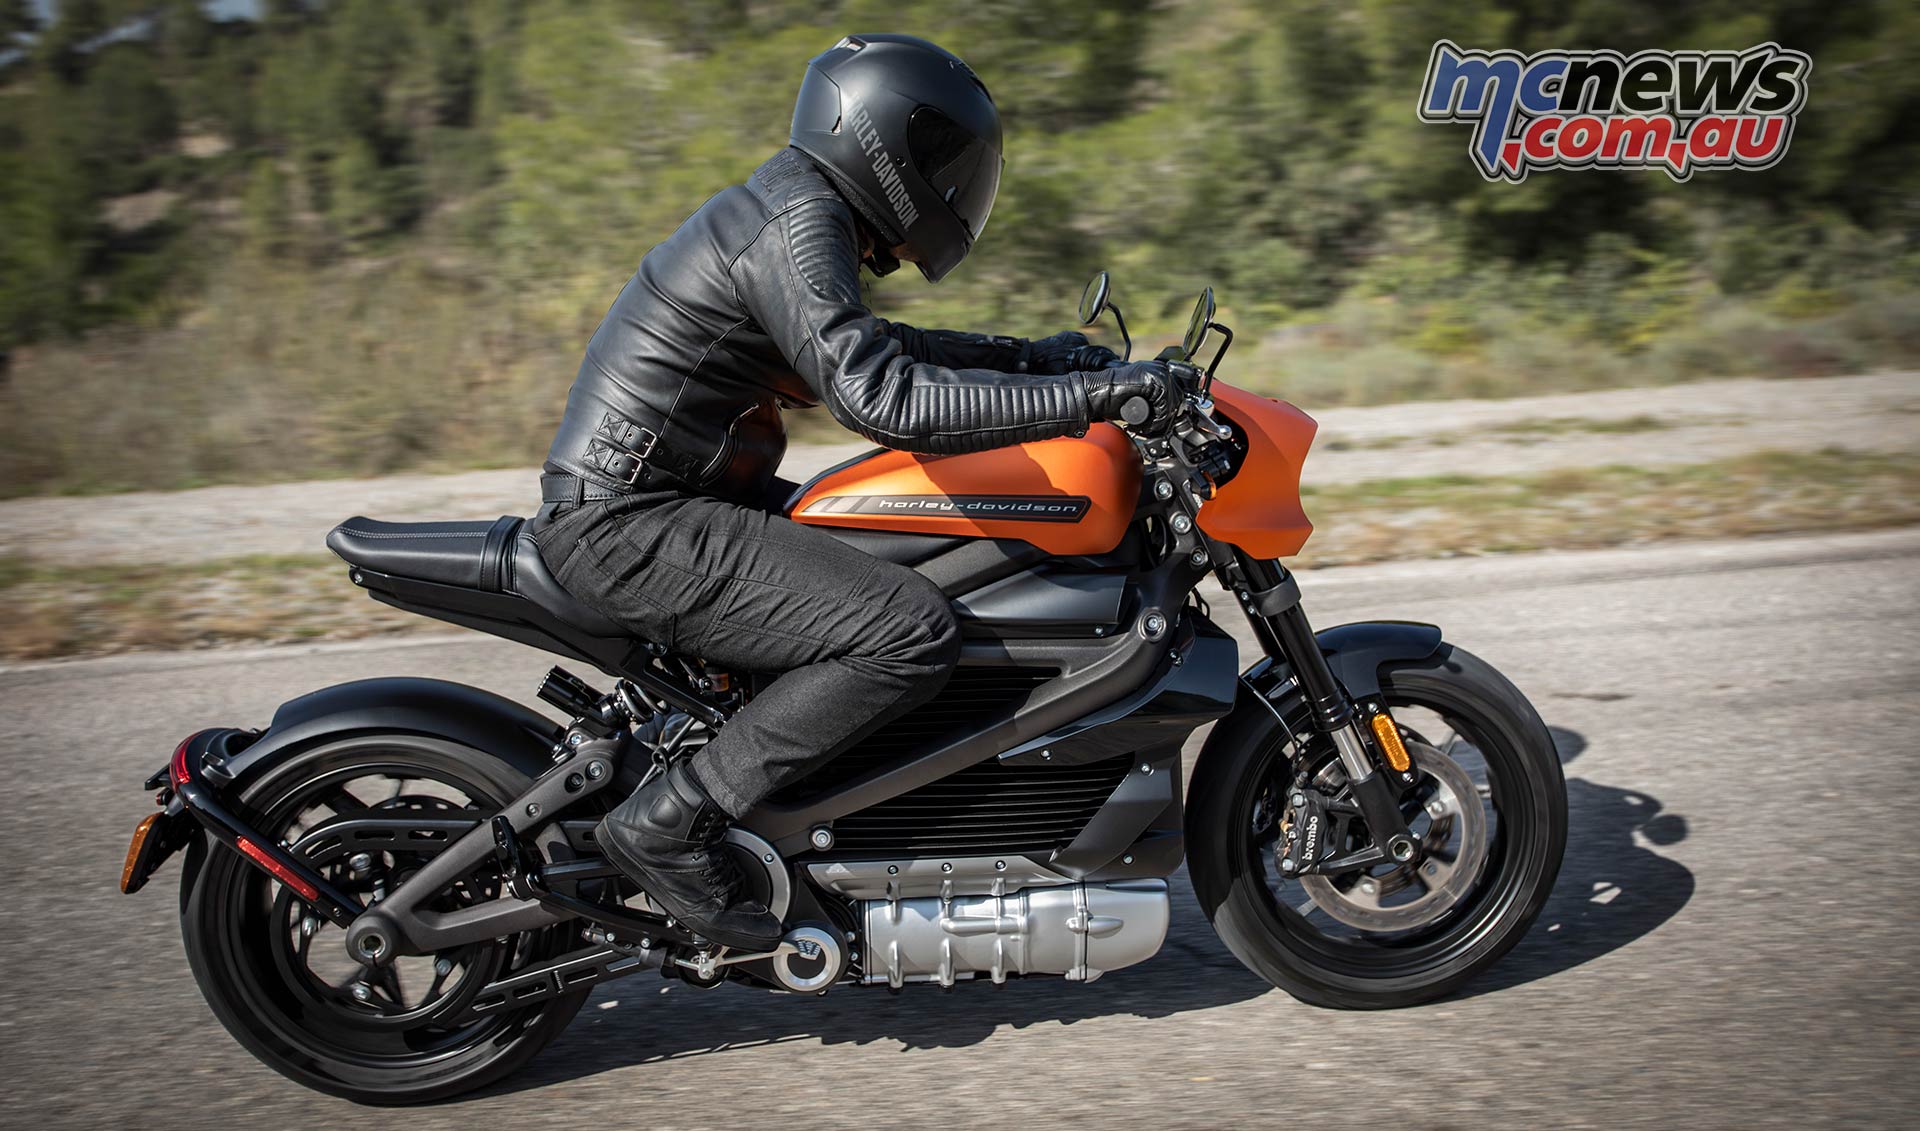 Harley Davidson Livewire Likely To Be Around 44k Aud Motorcycle News